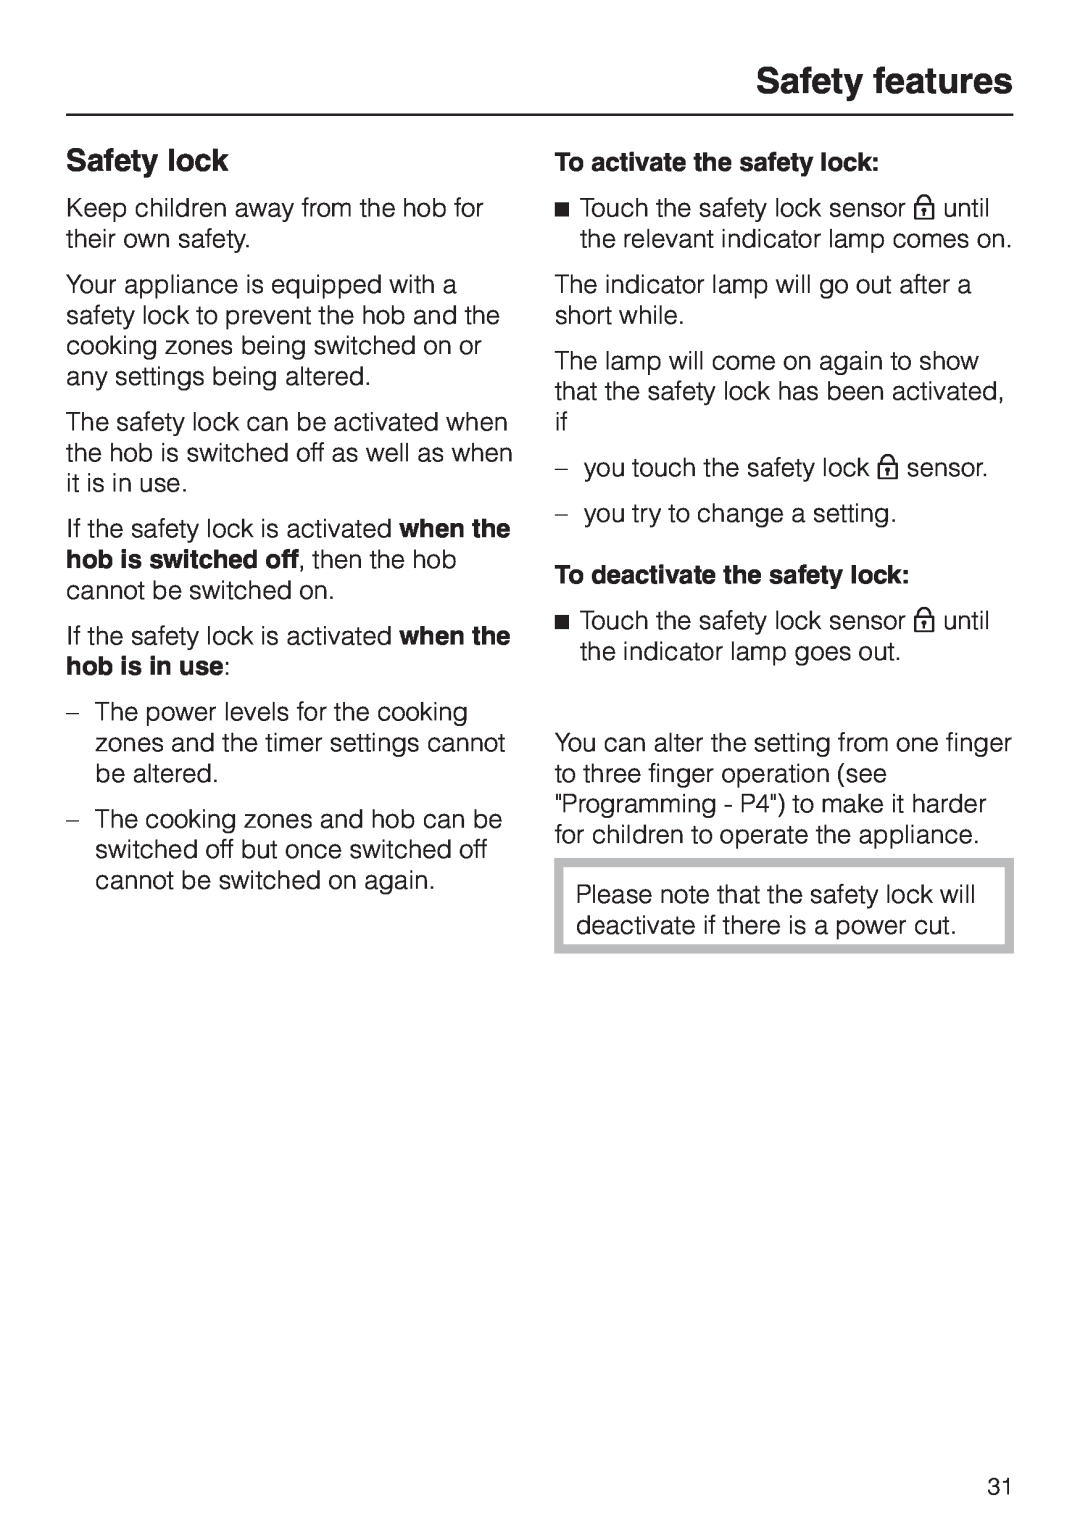 Miele KM5773 installation instructions Safety features, Safety lock 